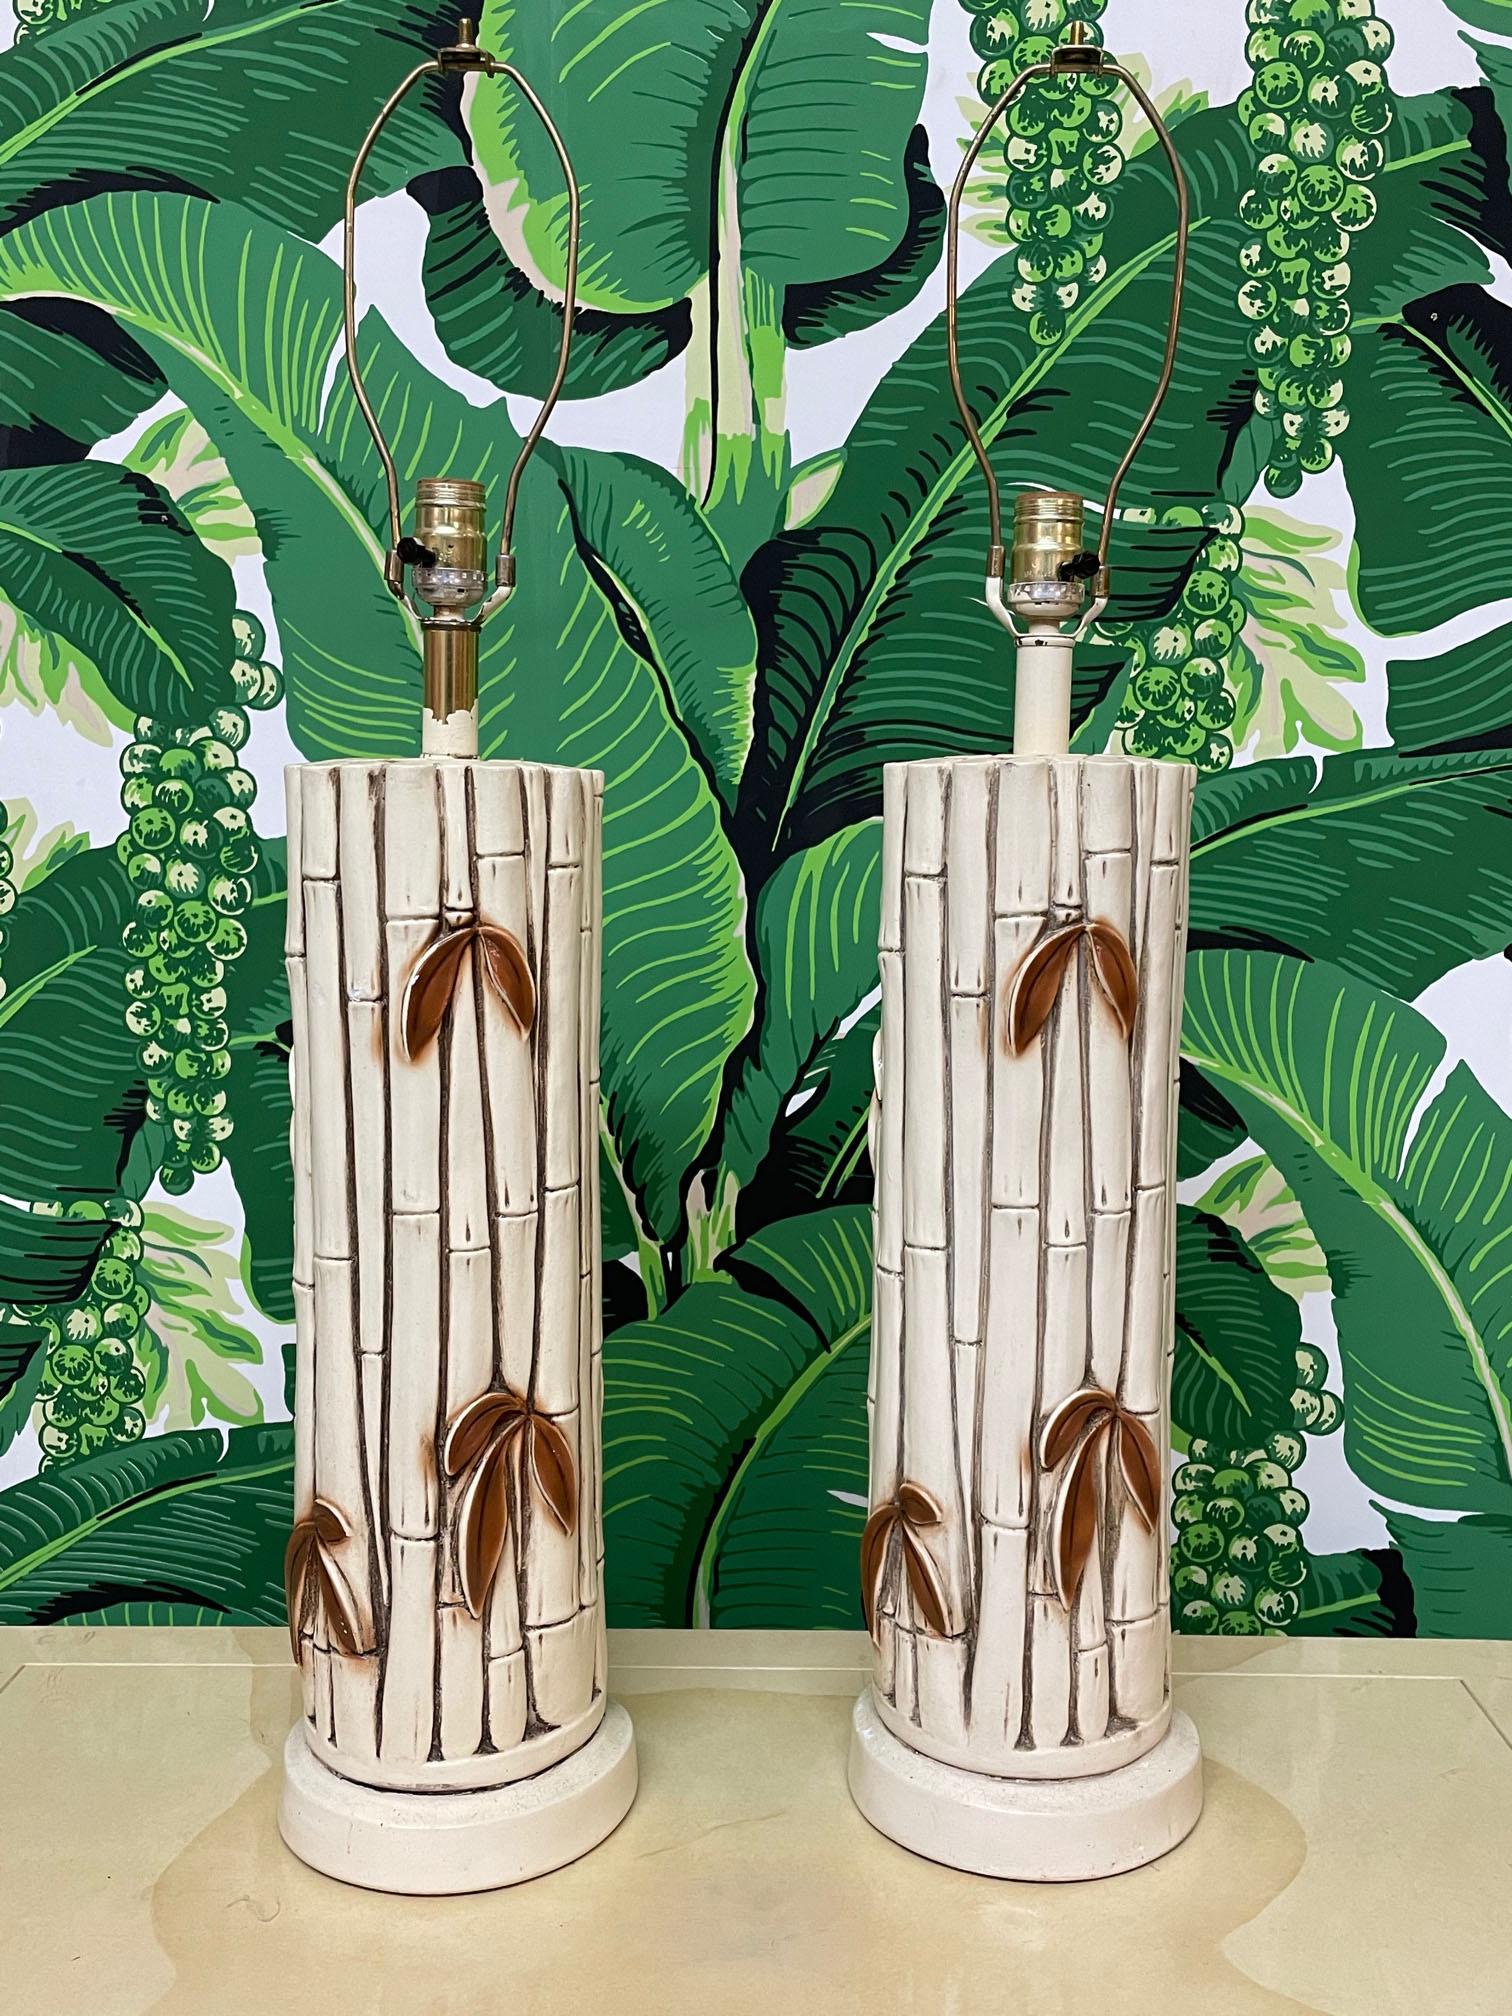 Pair of vintage table lamps in faux bamboo style. Ceramic/plaster composition. Very good condition with only very minor imperfections consistent with age. May exhibit scuffs, marks, or wear, see photos for details.

 